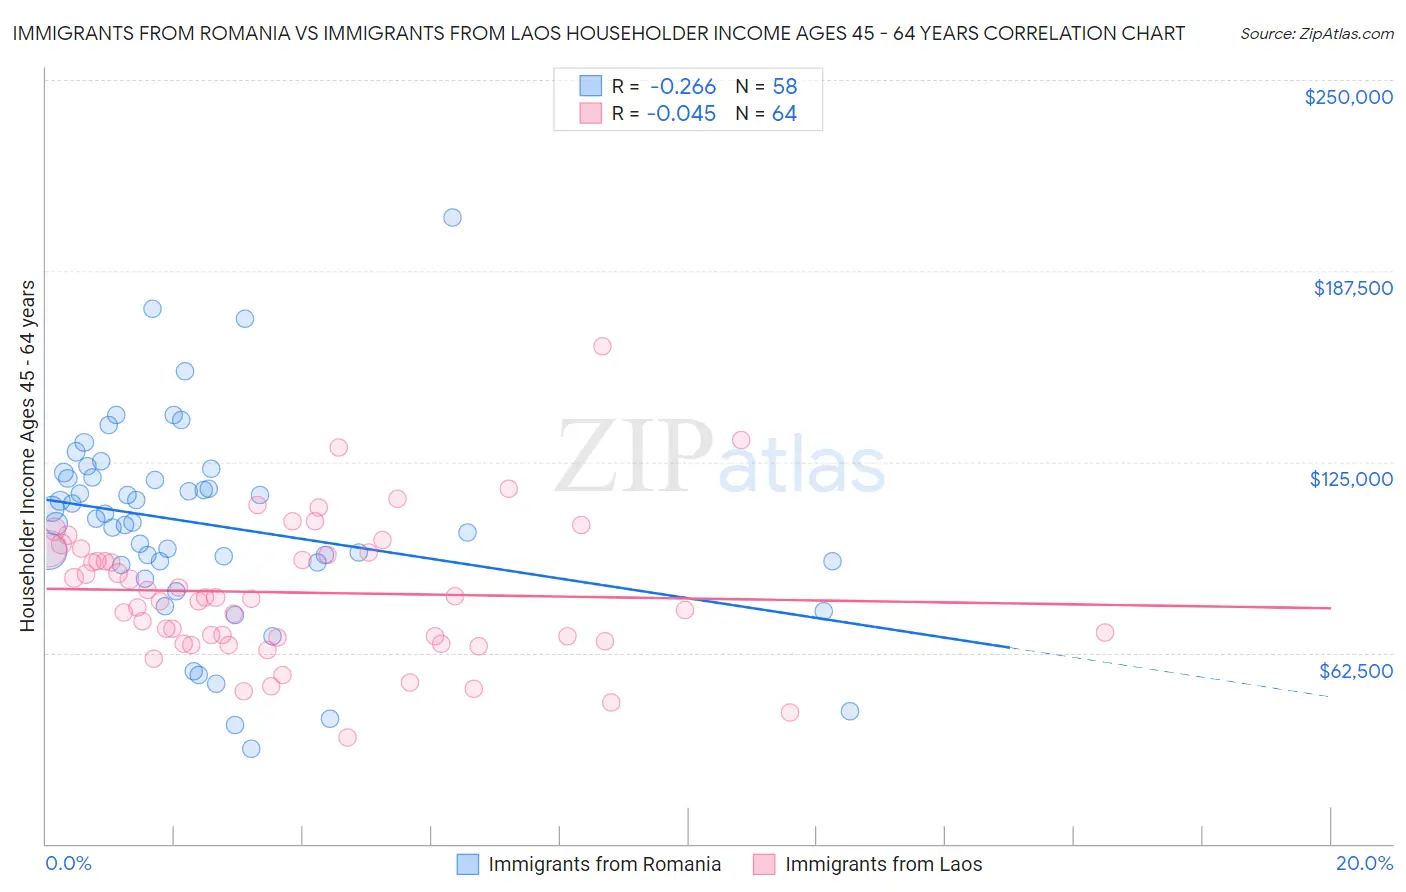 Immigrants from Romania vs Immigrants from Laos Householder Income Ages 45 - 64 years